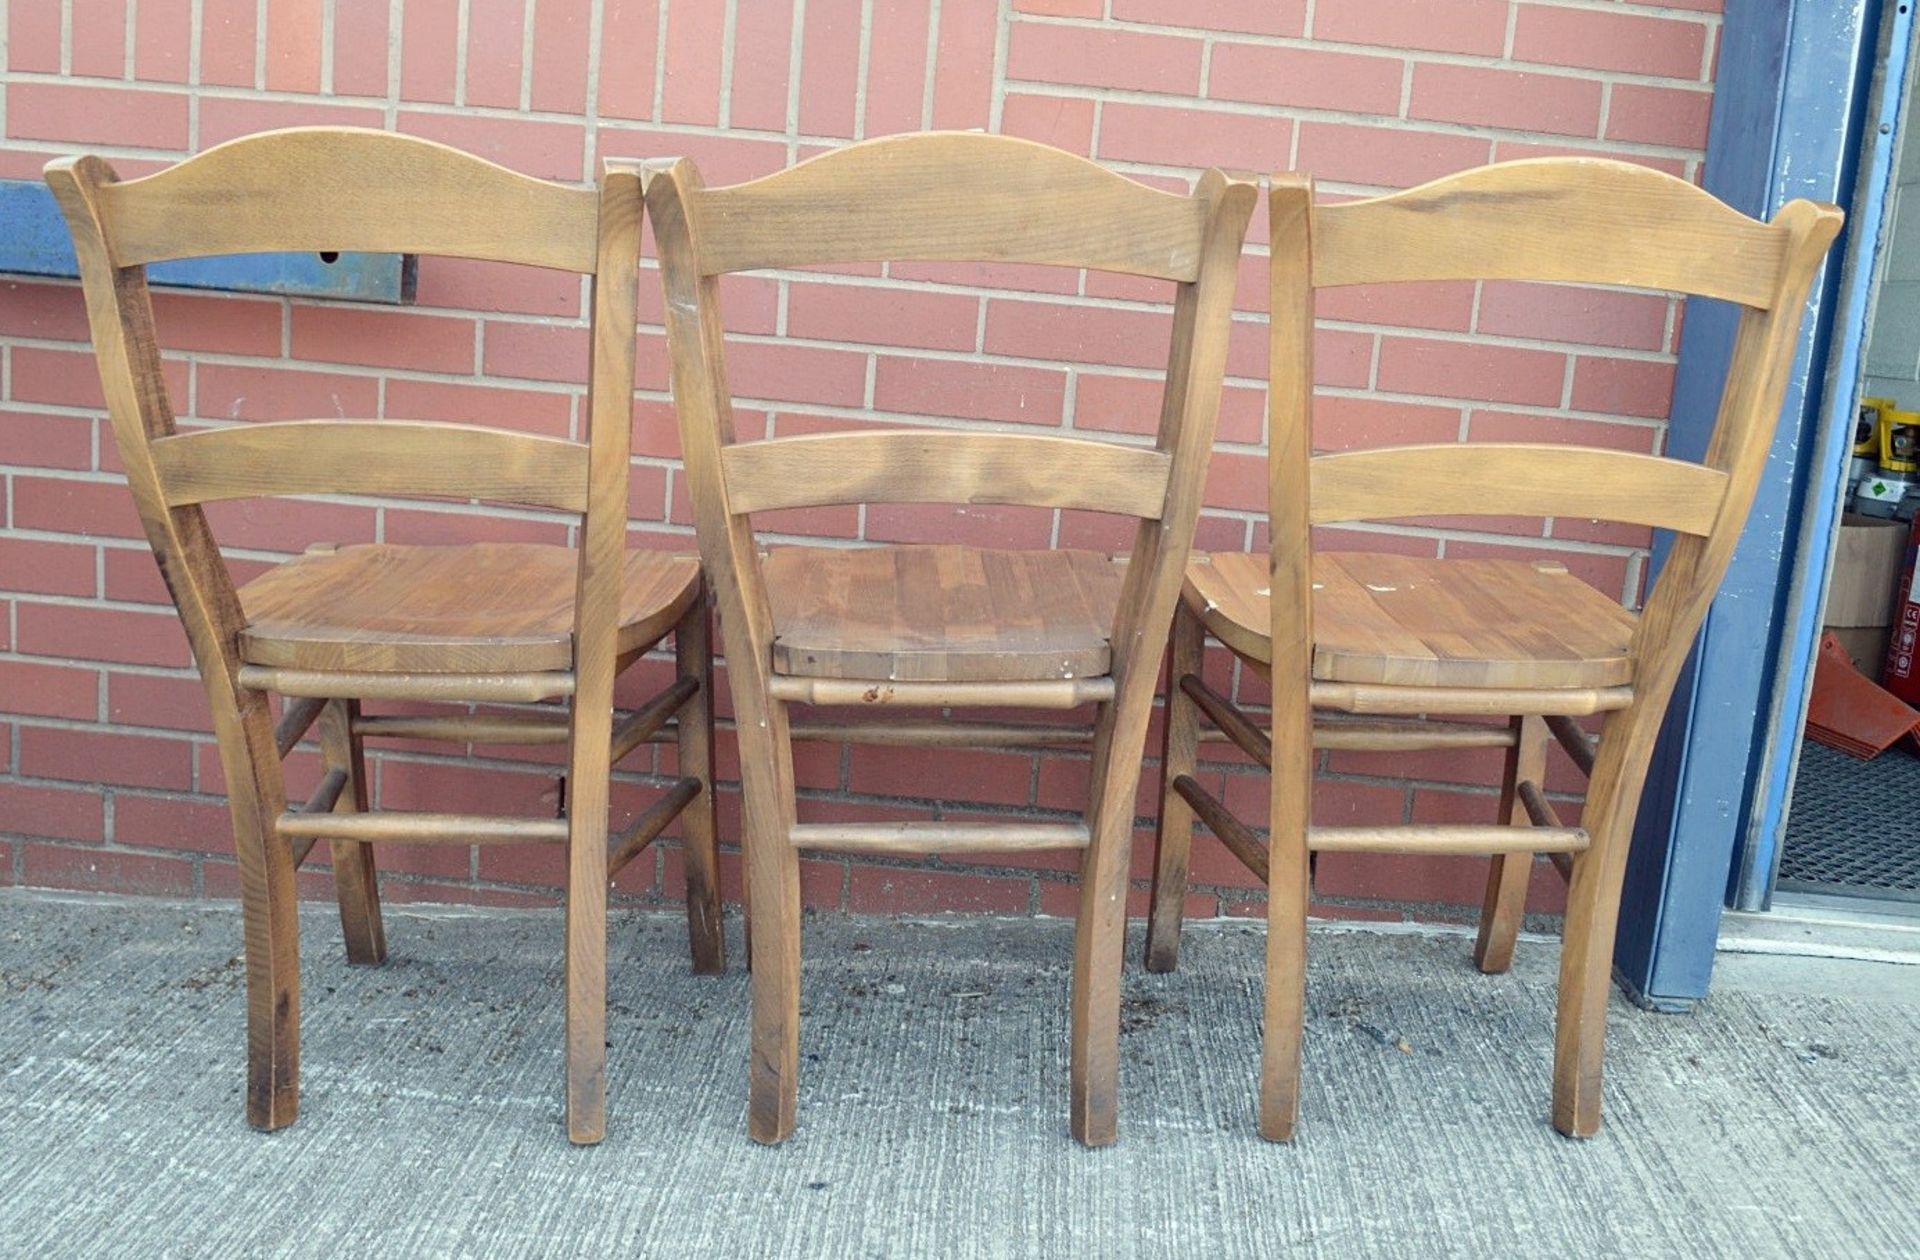 3 x Matching Sturdy Solid Wood Chairs With An Attractive Varnished Finish - Dimensions: H90 x W47 - Image 6 of 7